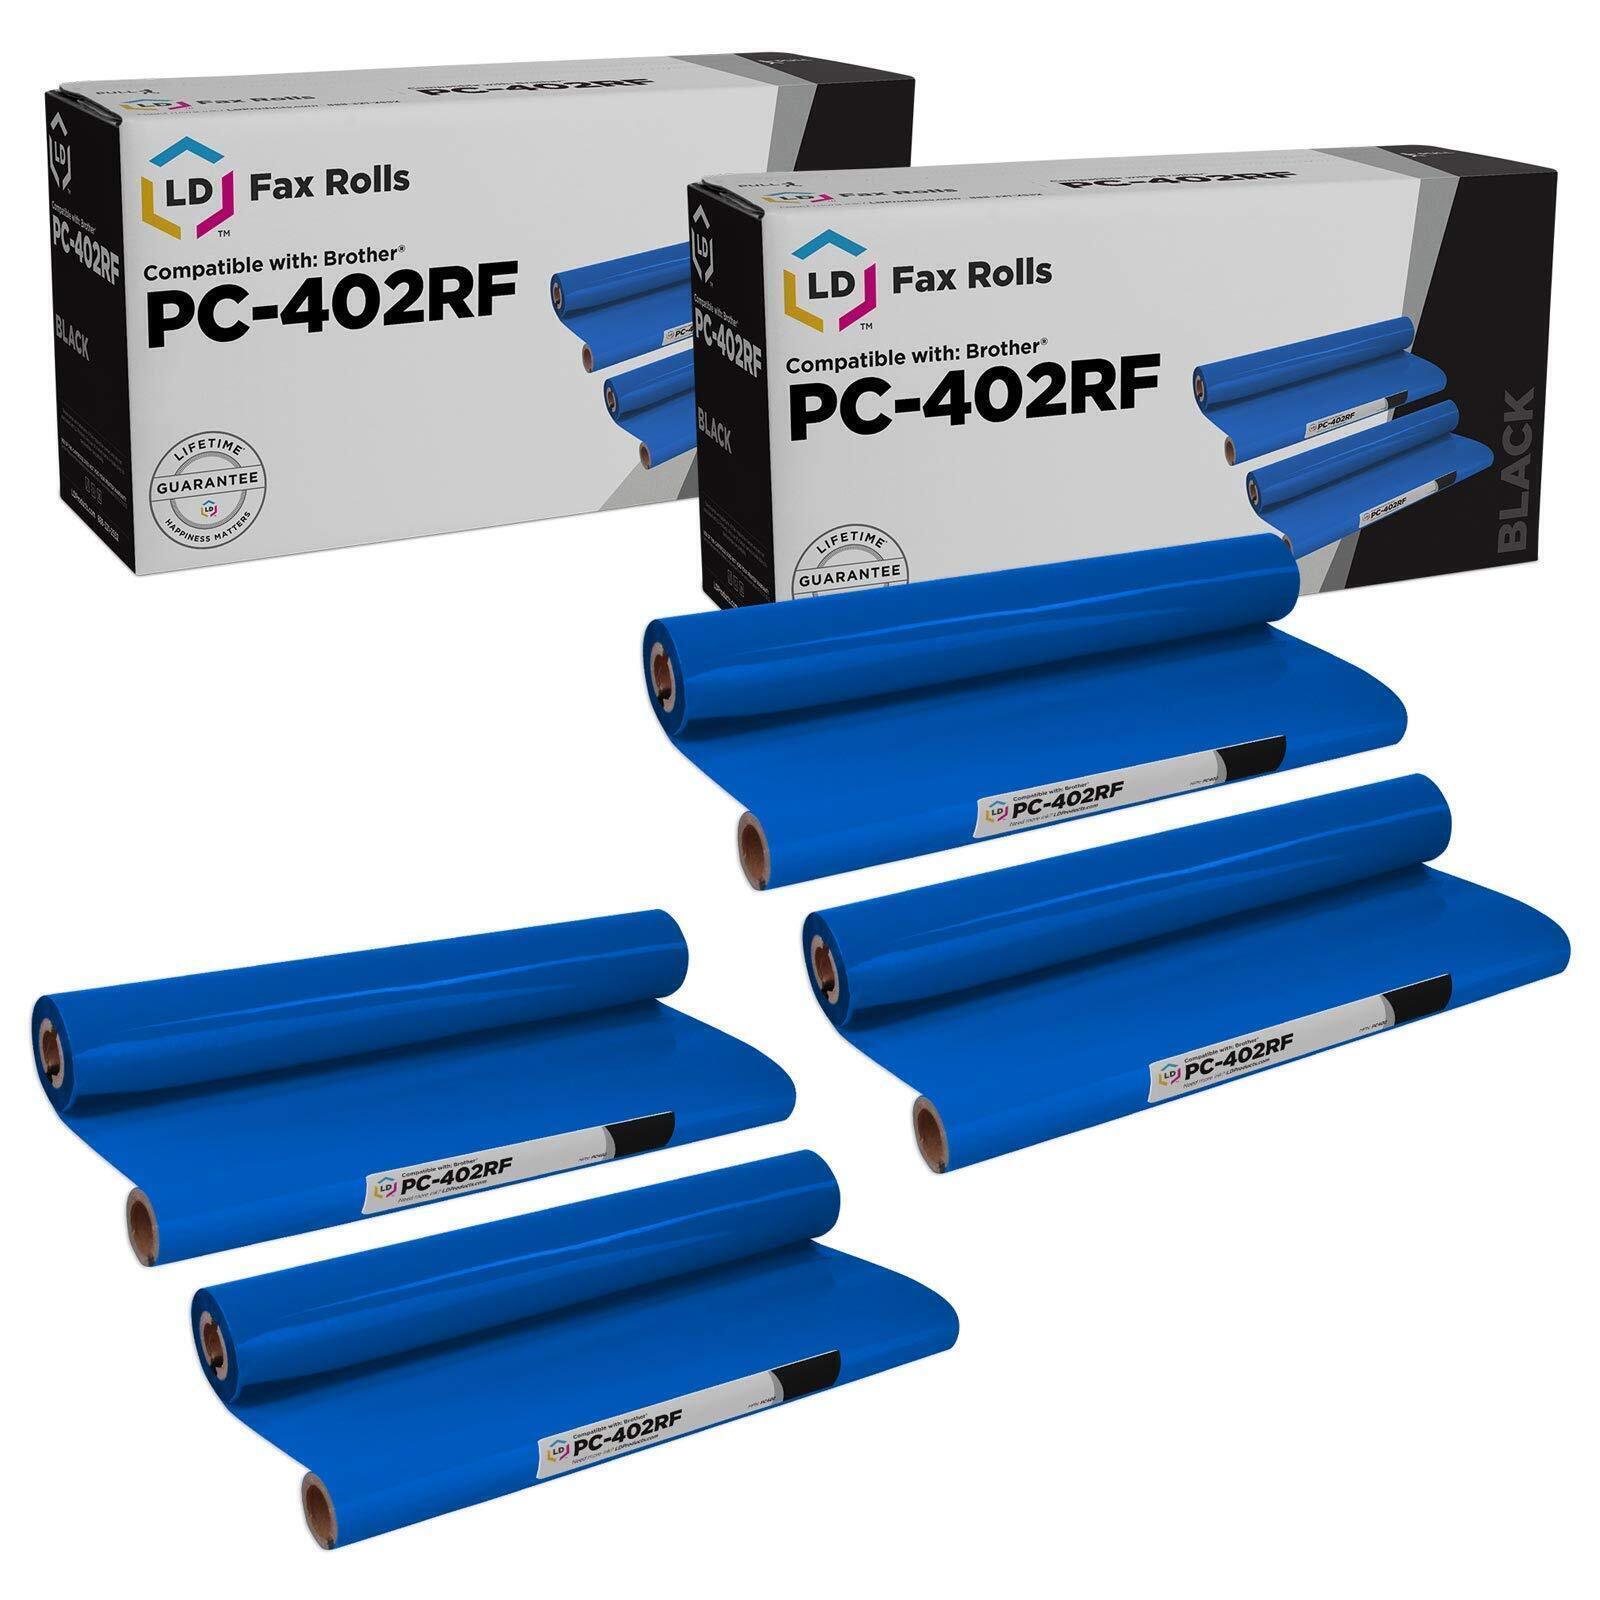 Compatible Brother PC402 Set of 4 Thermal Fax Ribbon Refill Rolls